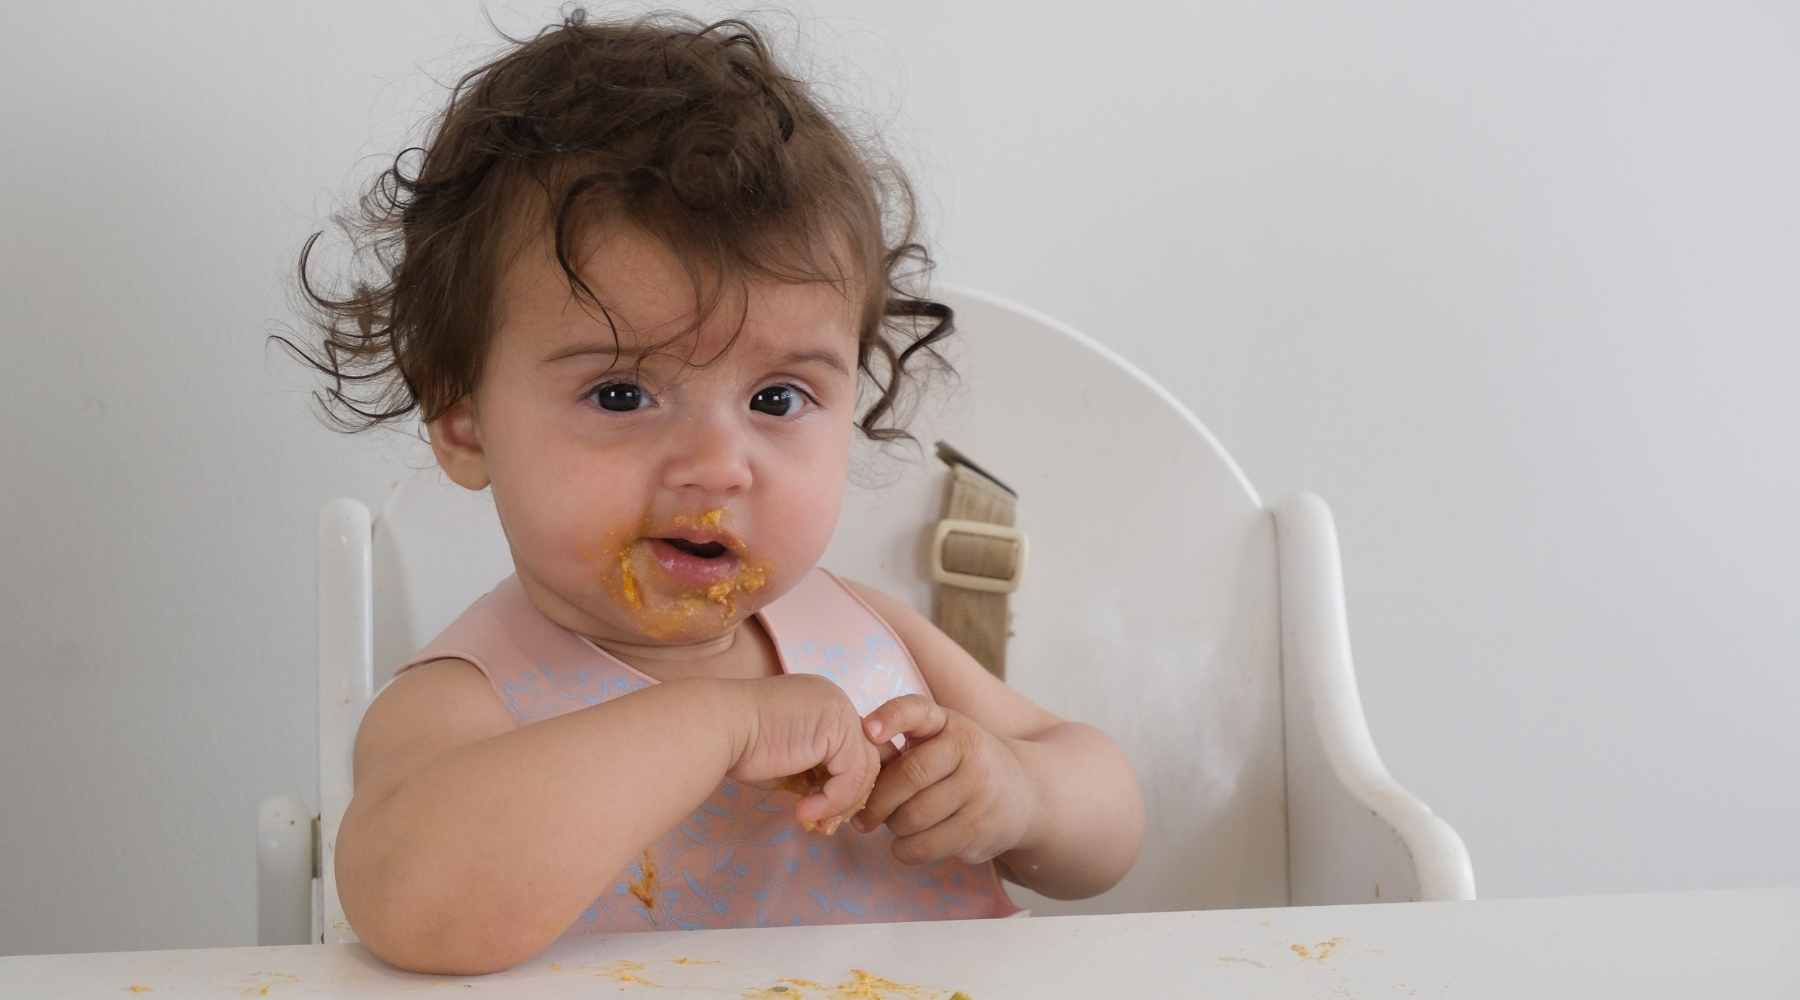 the challenge with encouraging baby led weaning is often the amount of mess and muck that goes with it